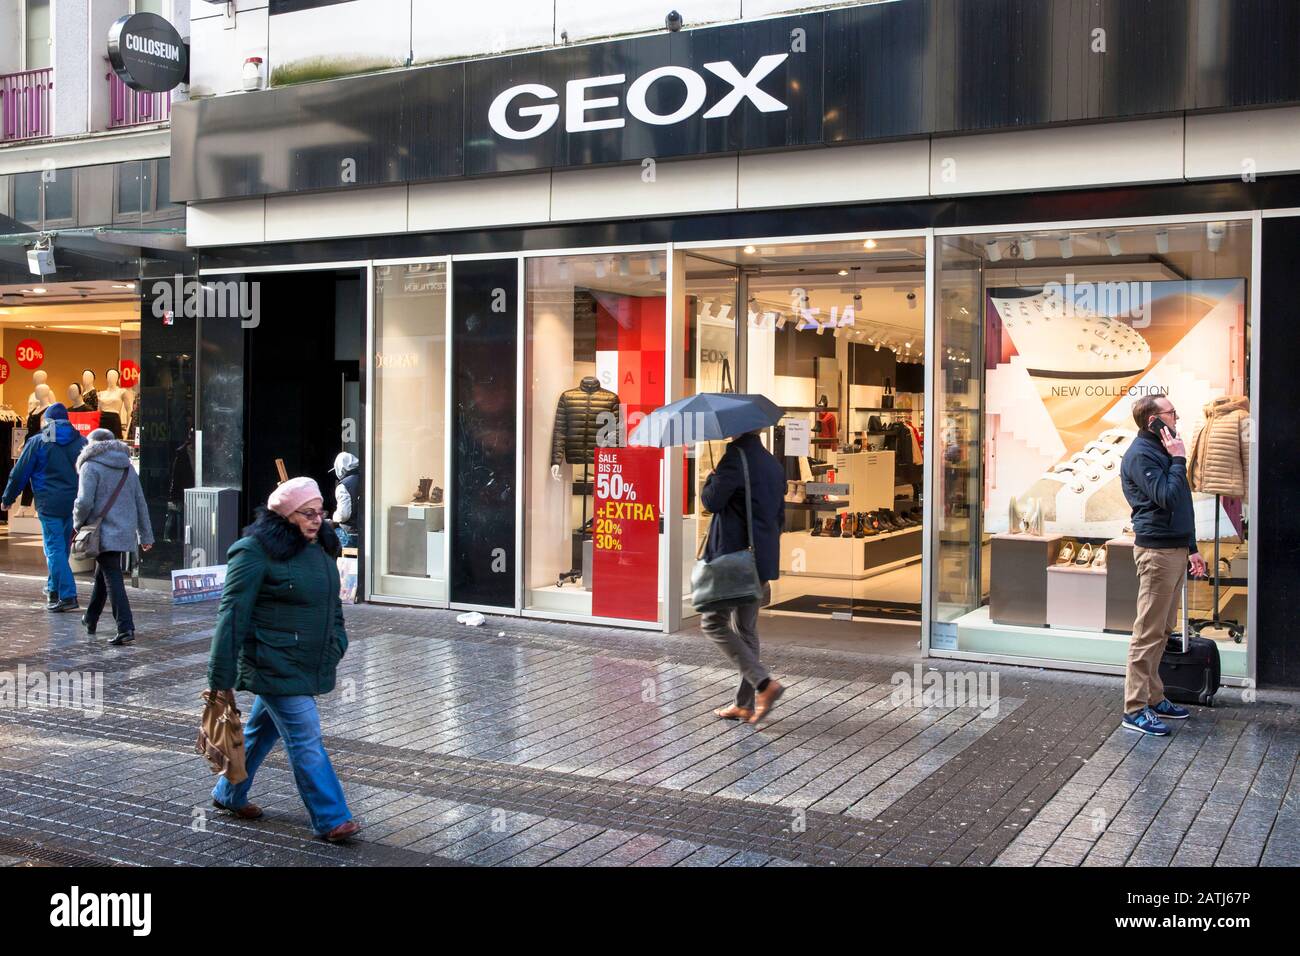 Geox store stock images - Alamy